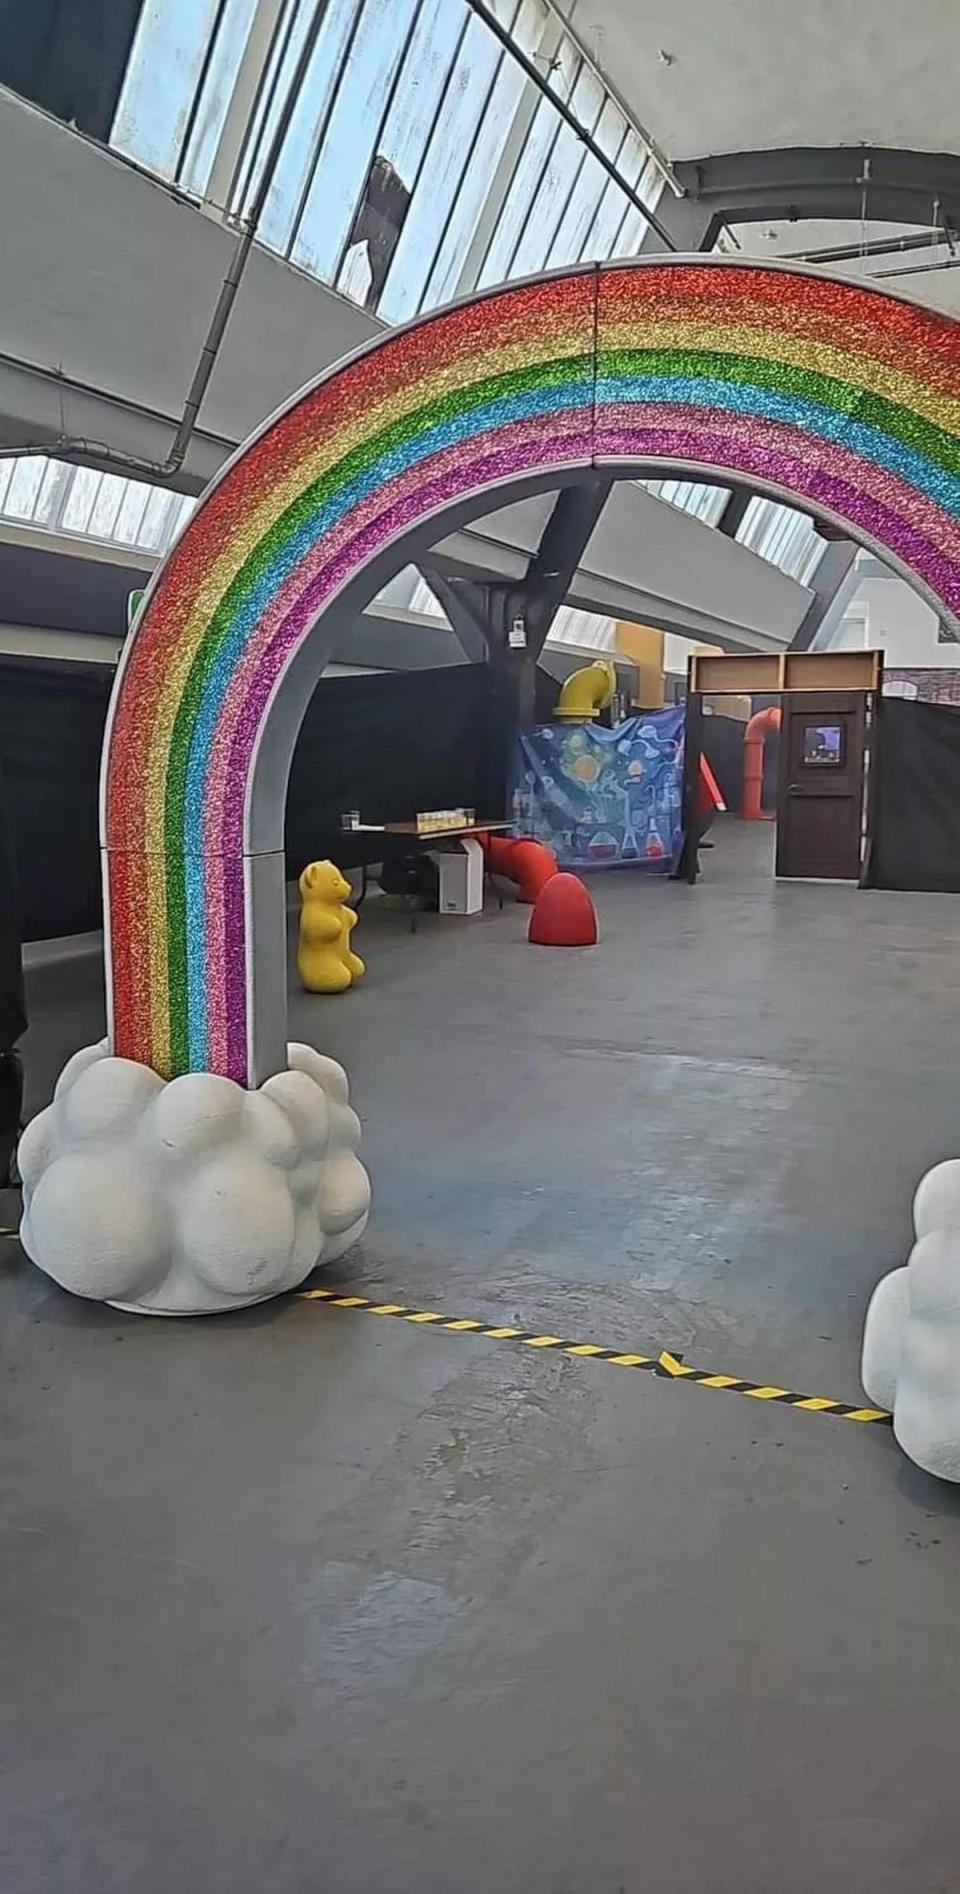 A rainbow in the world of pure imagination (Stuart Sinclair/Facebook)